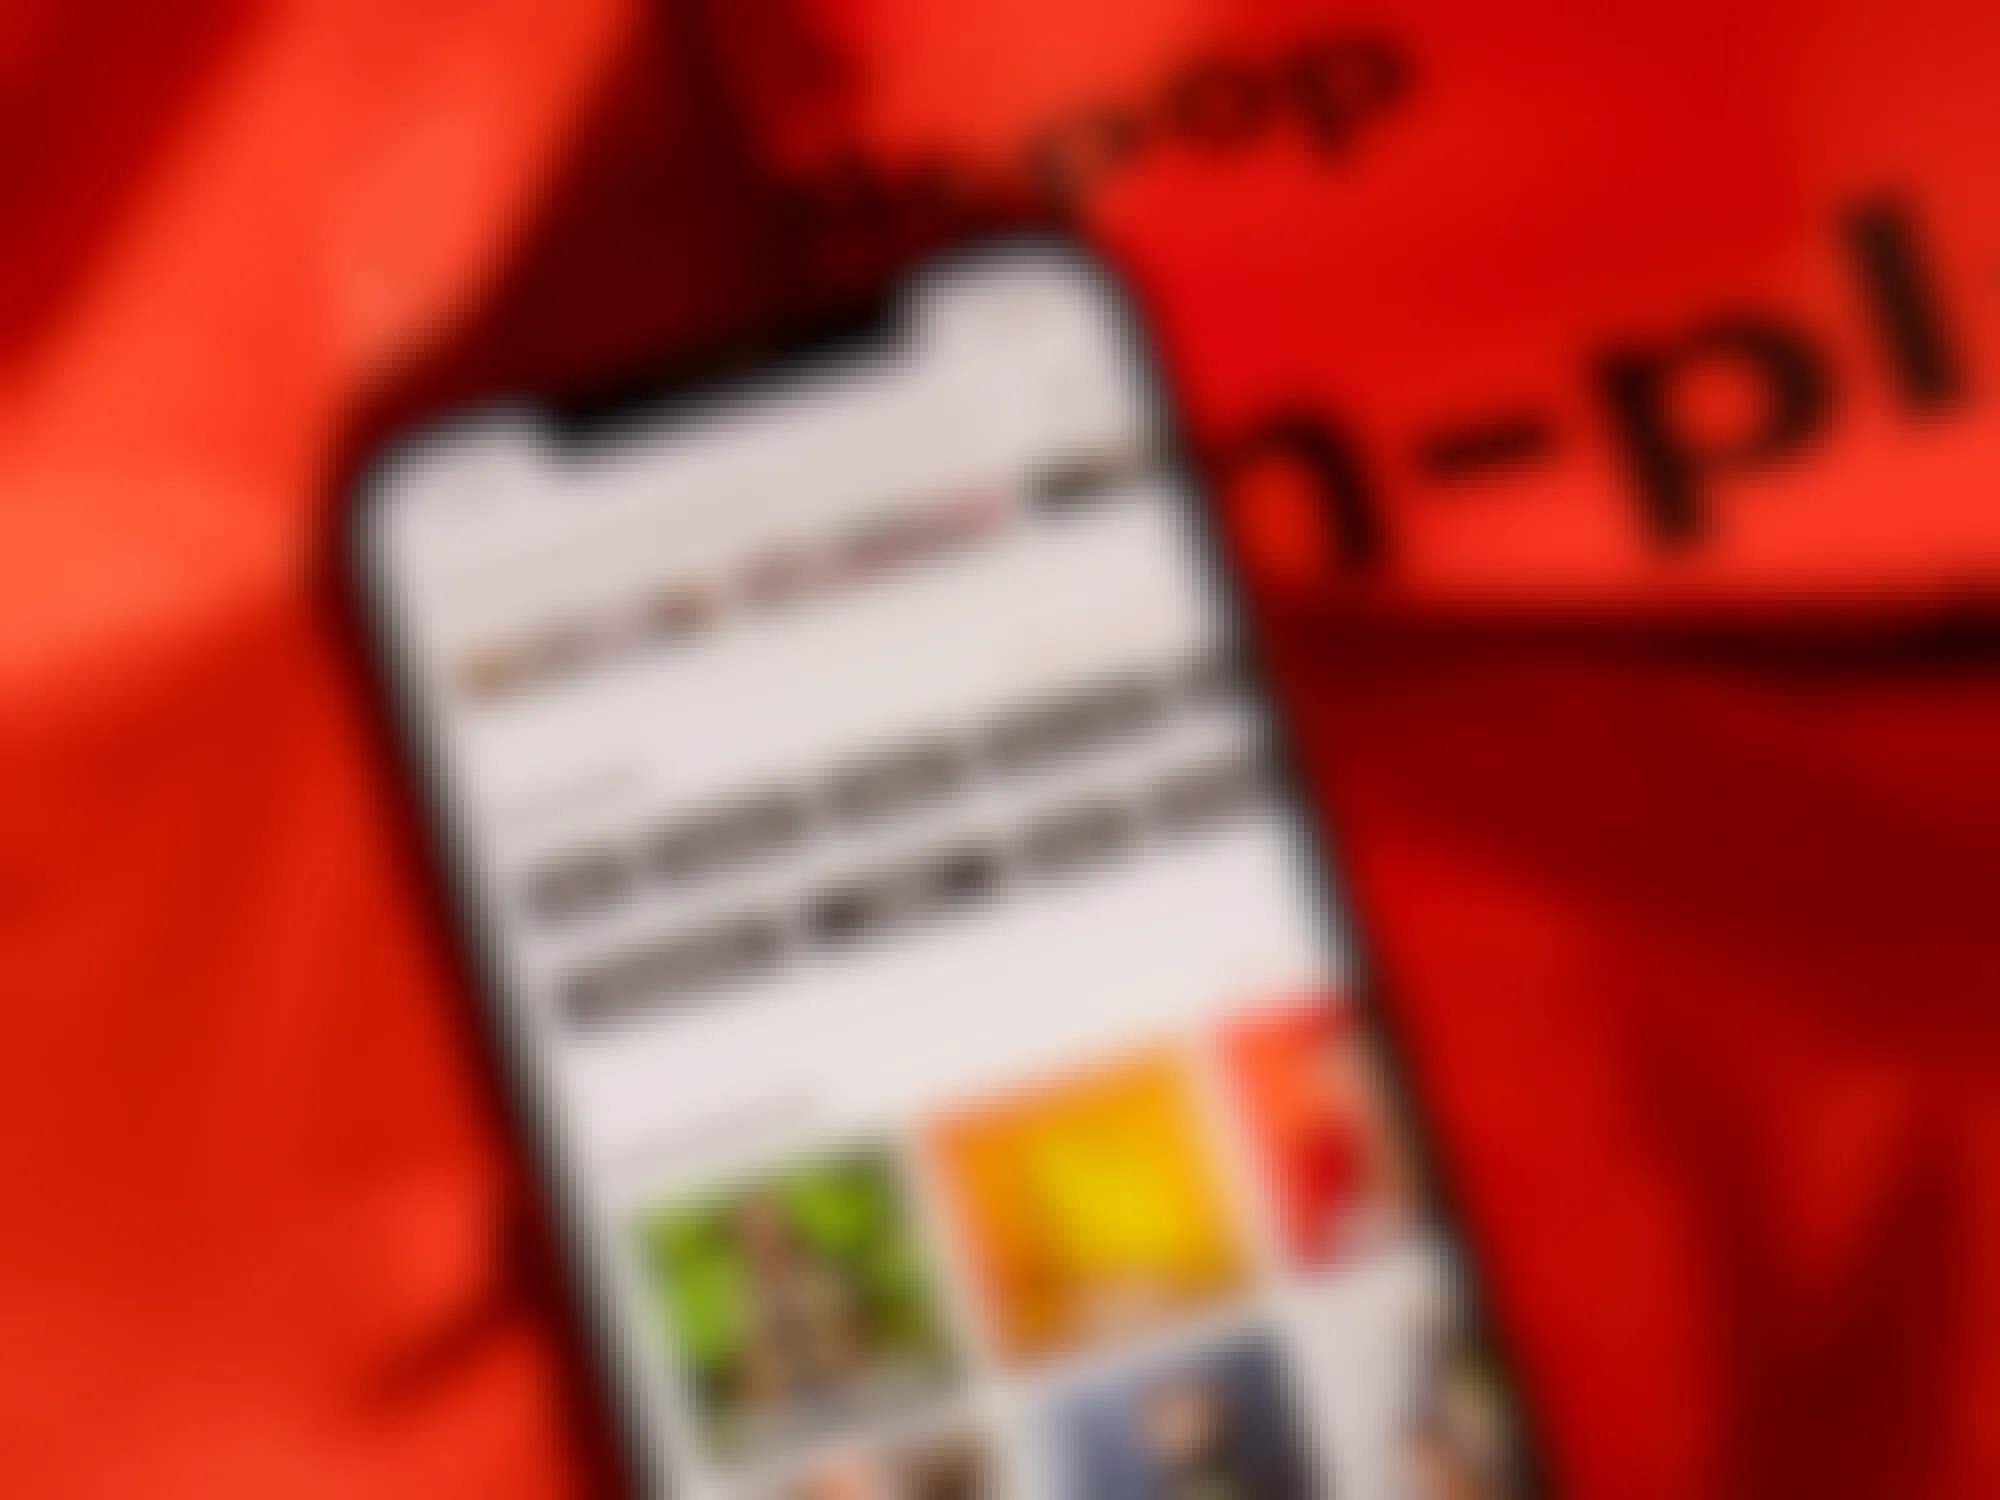 A close up on a phone sitting on top of a Depop bag, displaying the Depop app